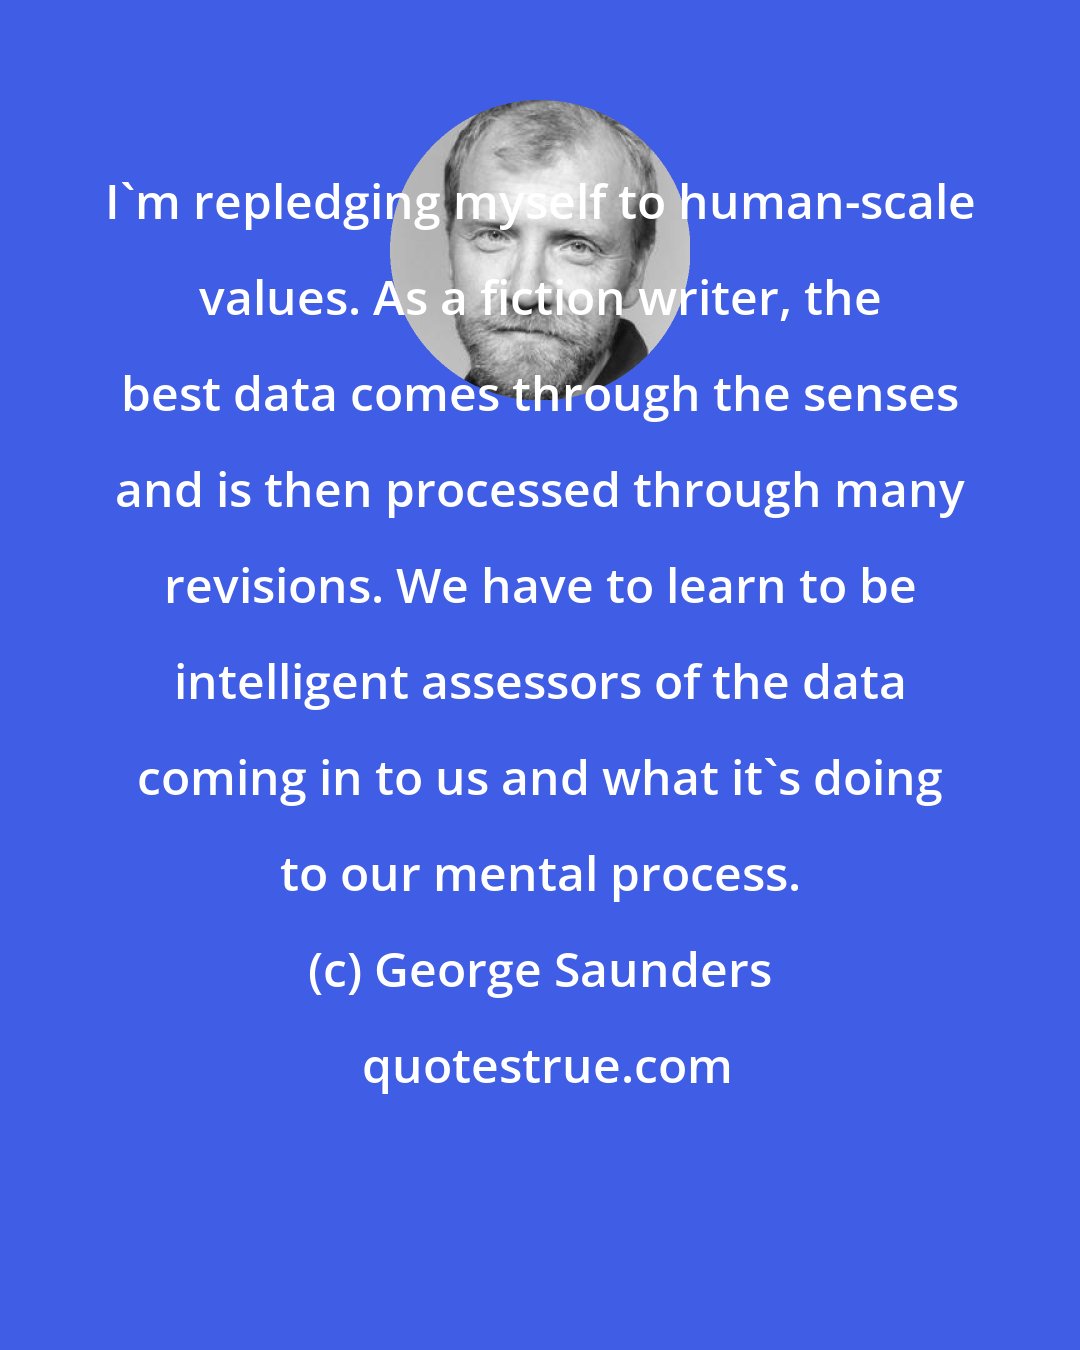 George Saunders: I'm repledging myself to human-scale values. As a fiction writer, the best data comes through the senses and is then processed through many revisions. We have to learn to be intelligent assessors of the data coming in to us and what it's doing to our mental process.